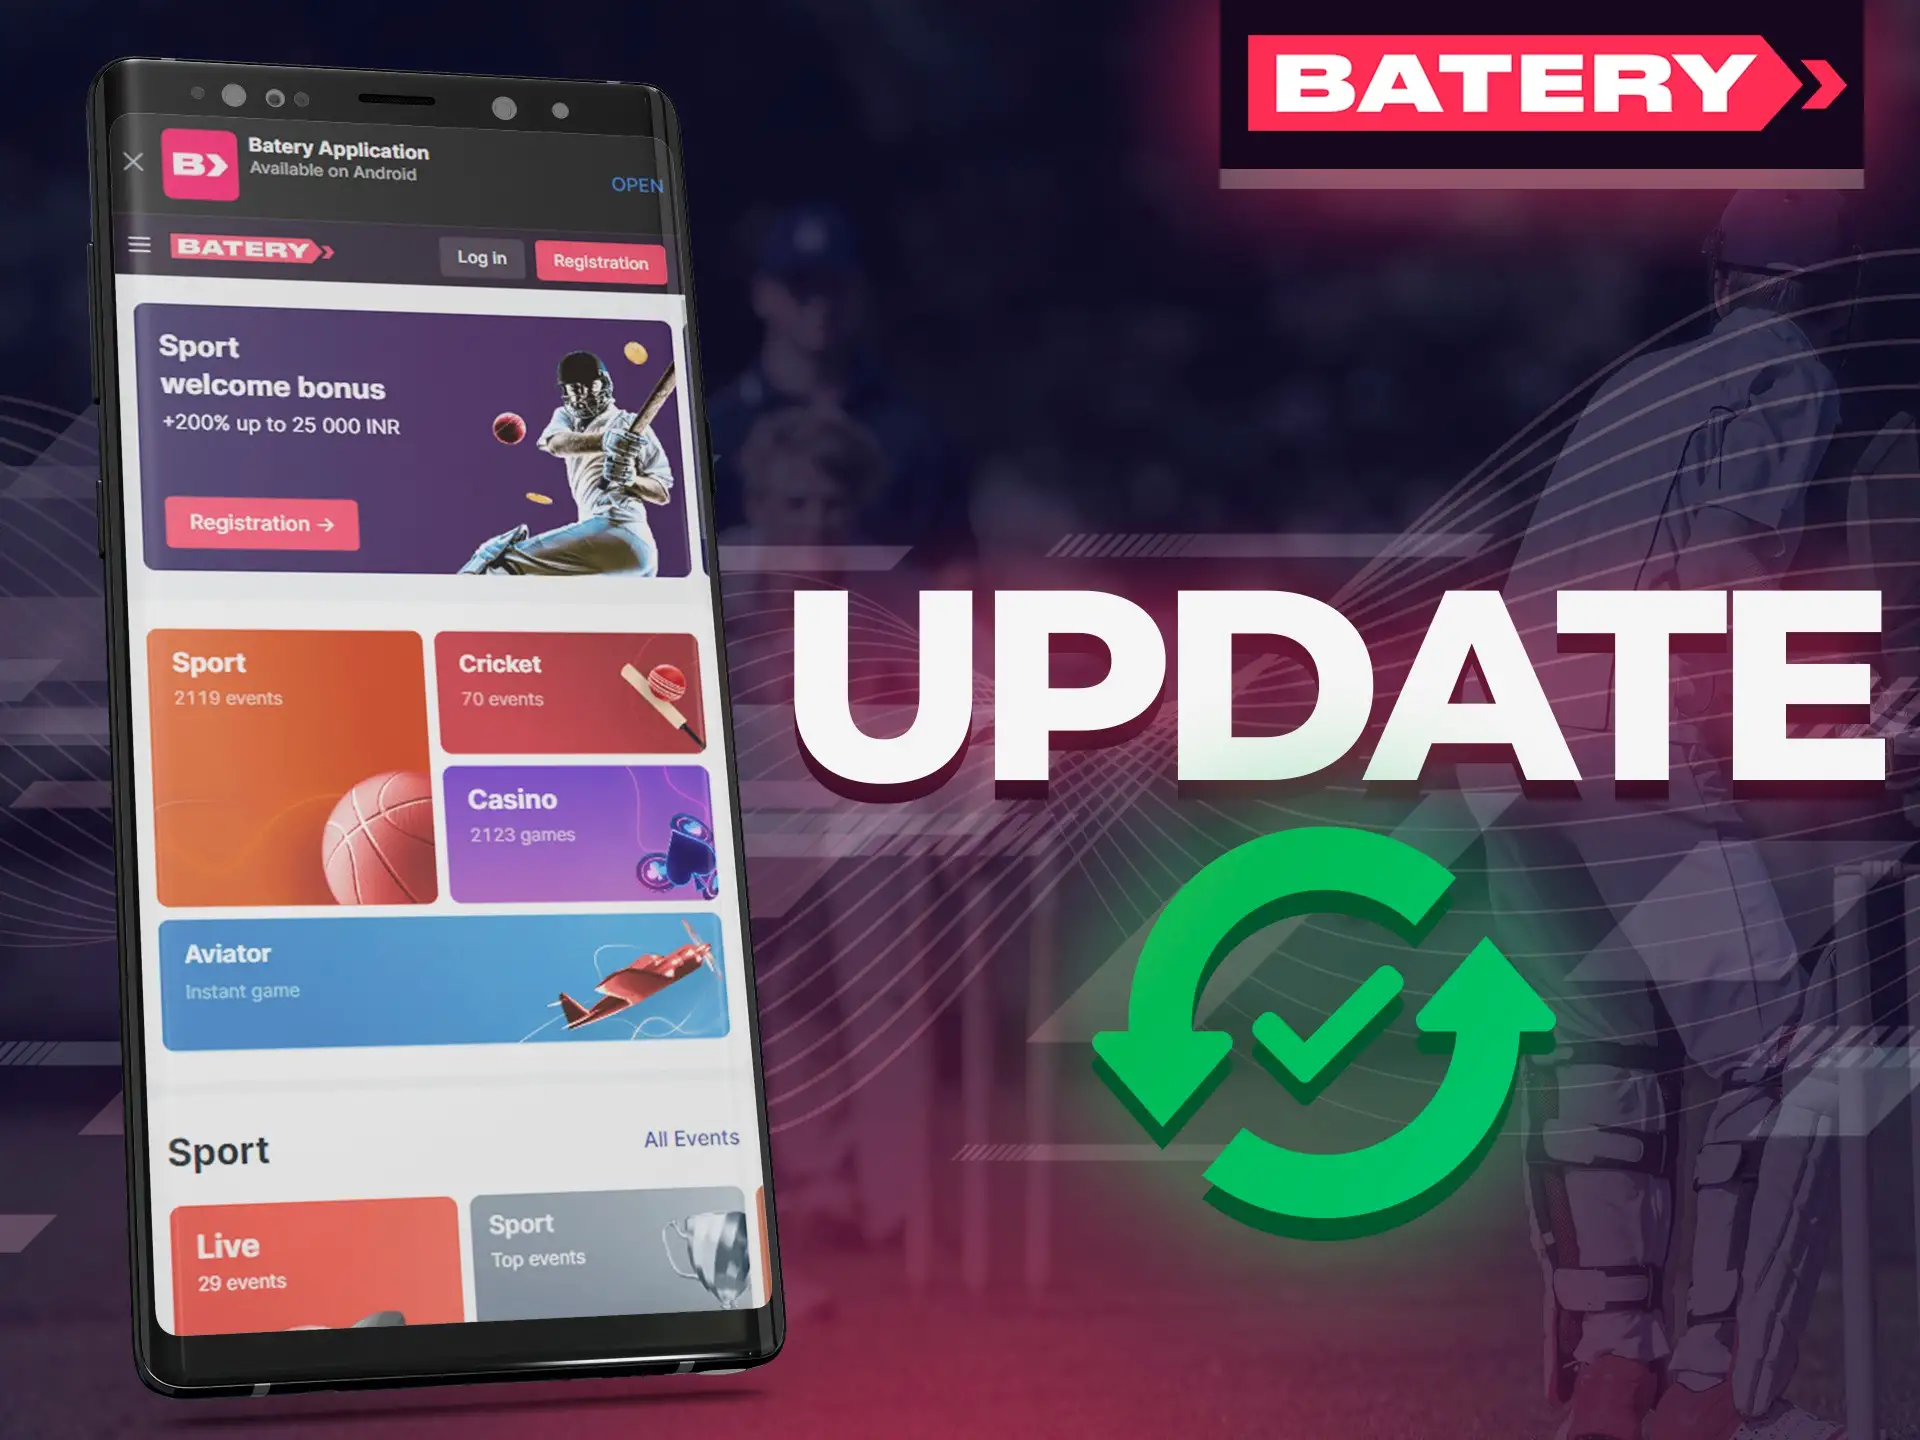 Batery app updates automatically after each logging in.